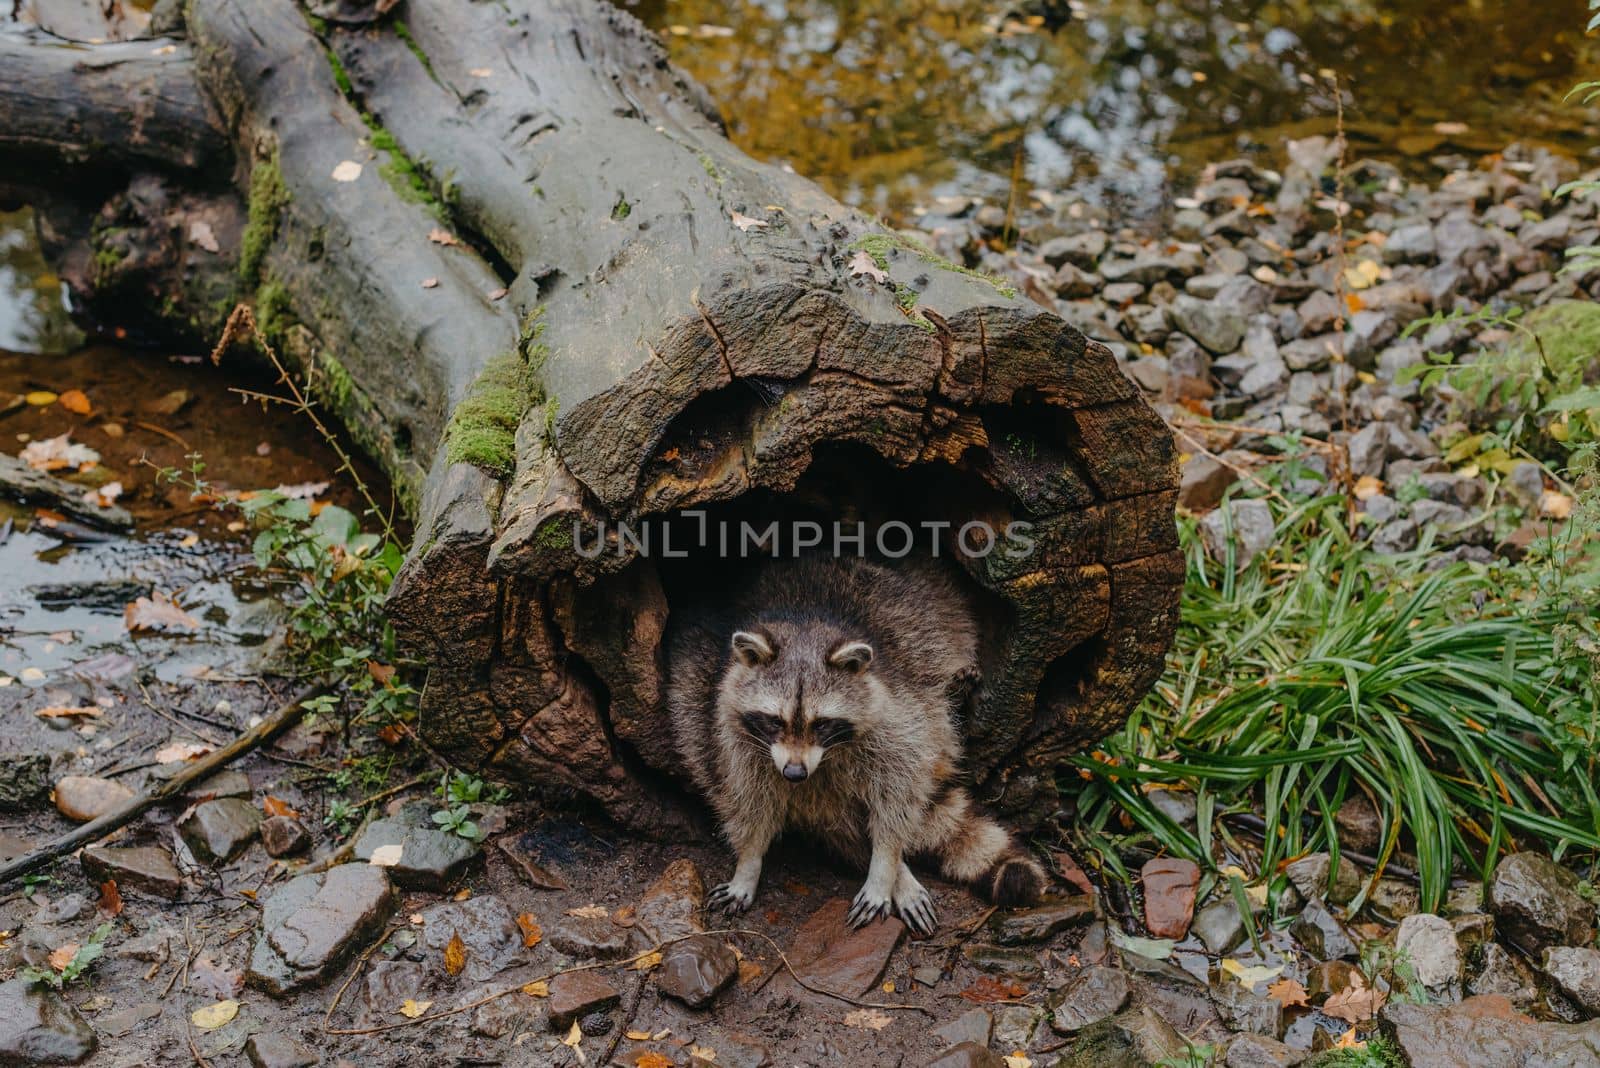 Gorgeous raccoon cute peeks out of a hollow in the bark of a large tree. Raccoon (Procyon lotor) also known as North American raccoon sitting hidden in old hollow trunk. Wildlife scene. Habitat North America, expansive in Europe, Asia.